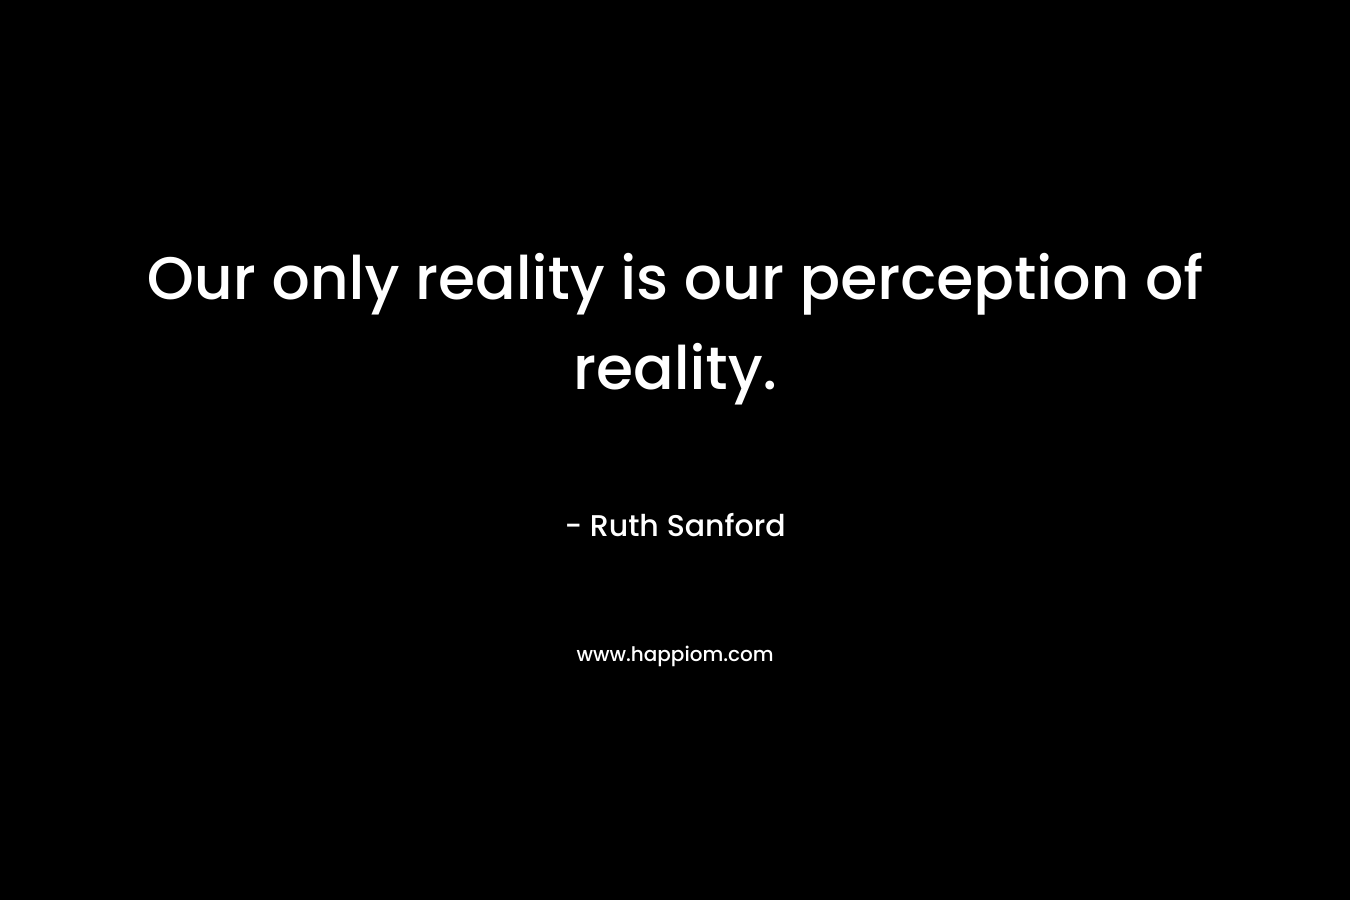 Our only reality is our perception of reality.